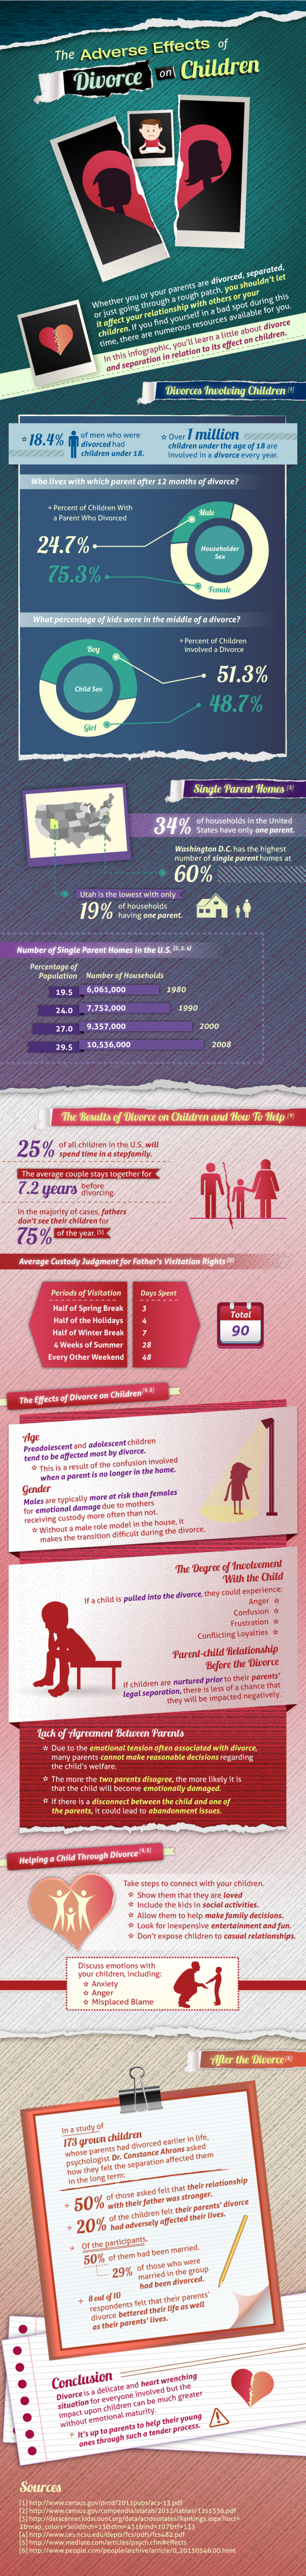 Adverse Effects of Divorce on Children Infographic